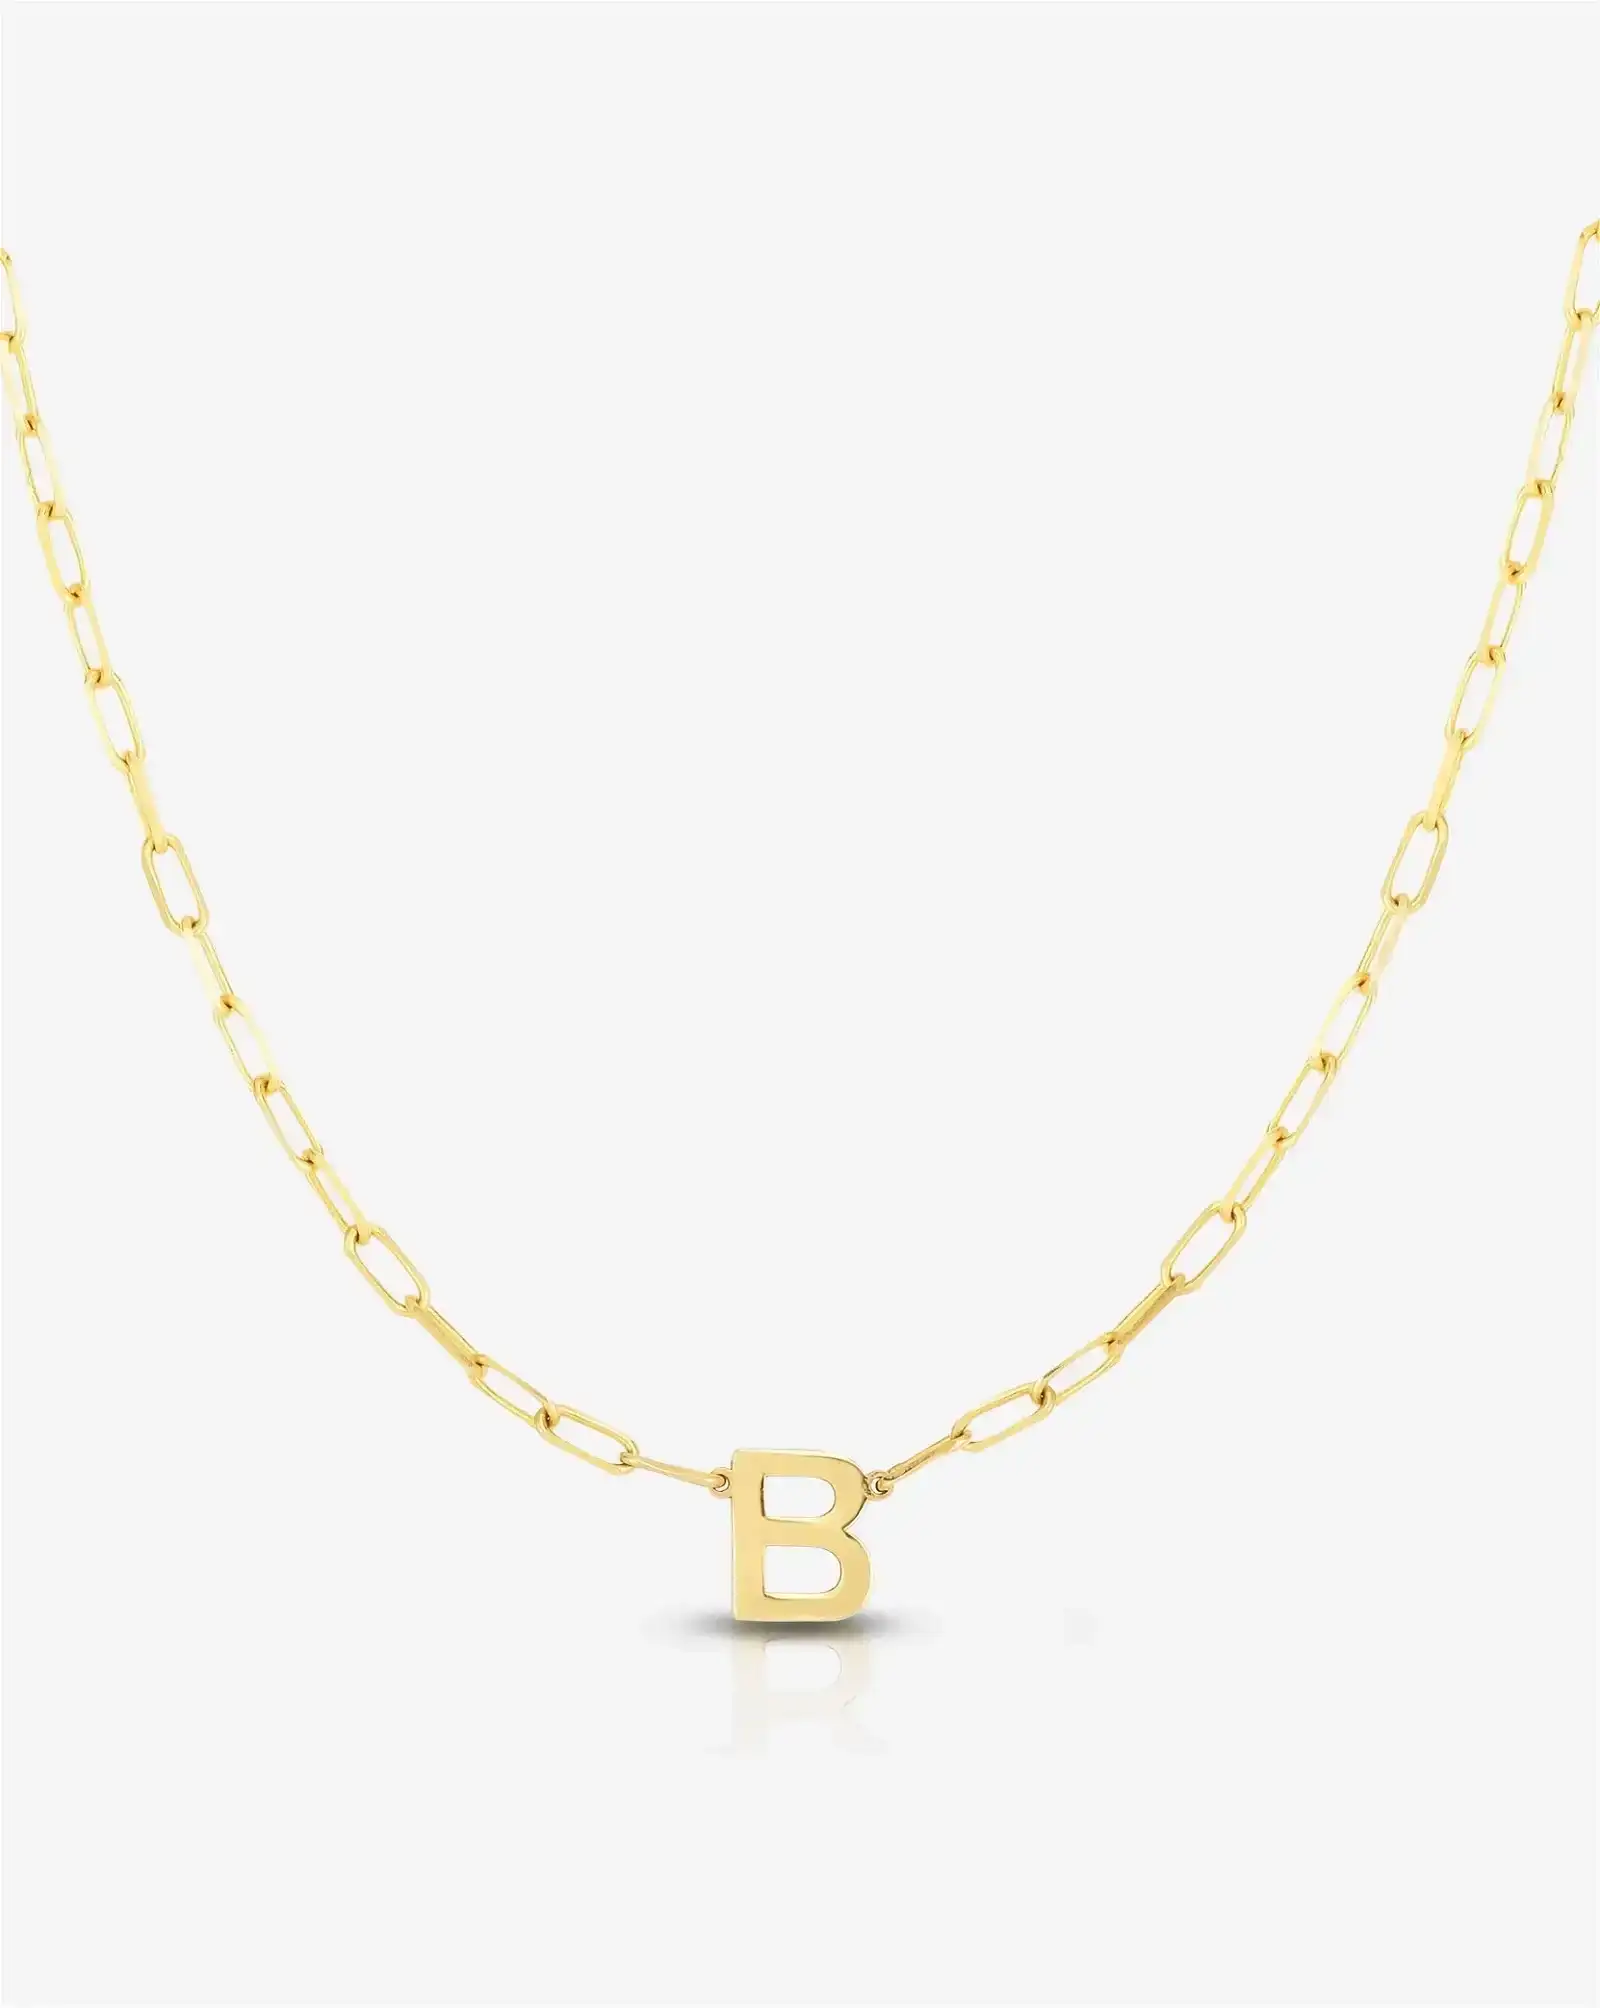 Image of Block Initial + Link Chain Necklace